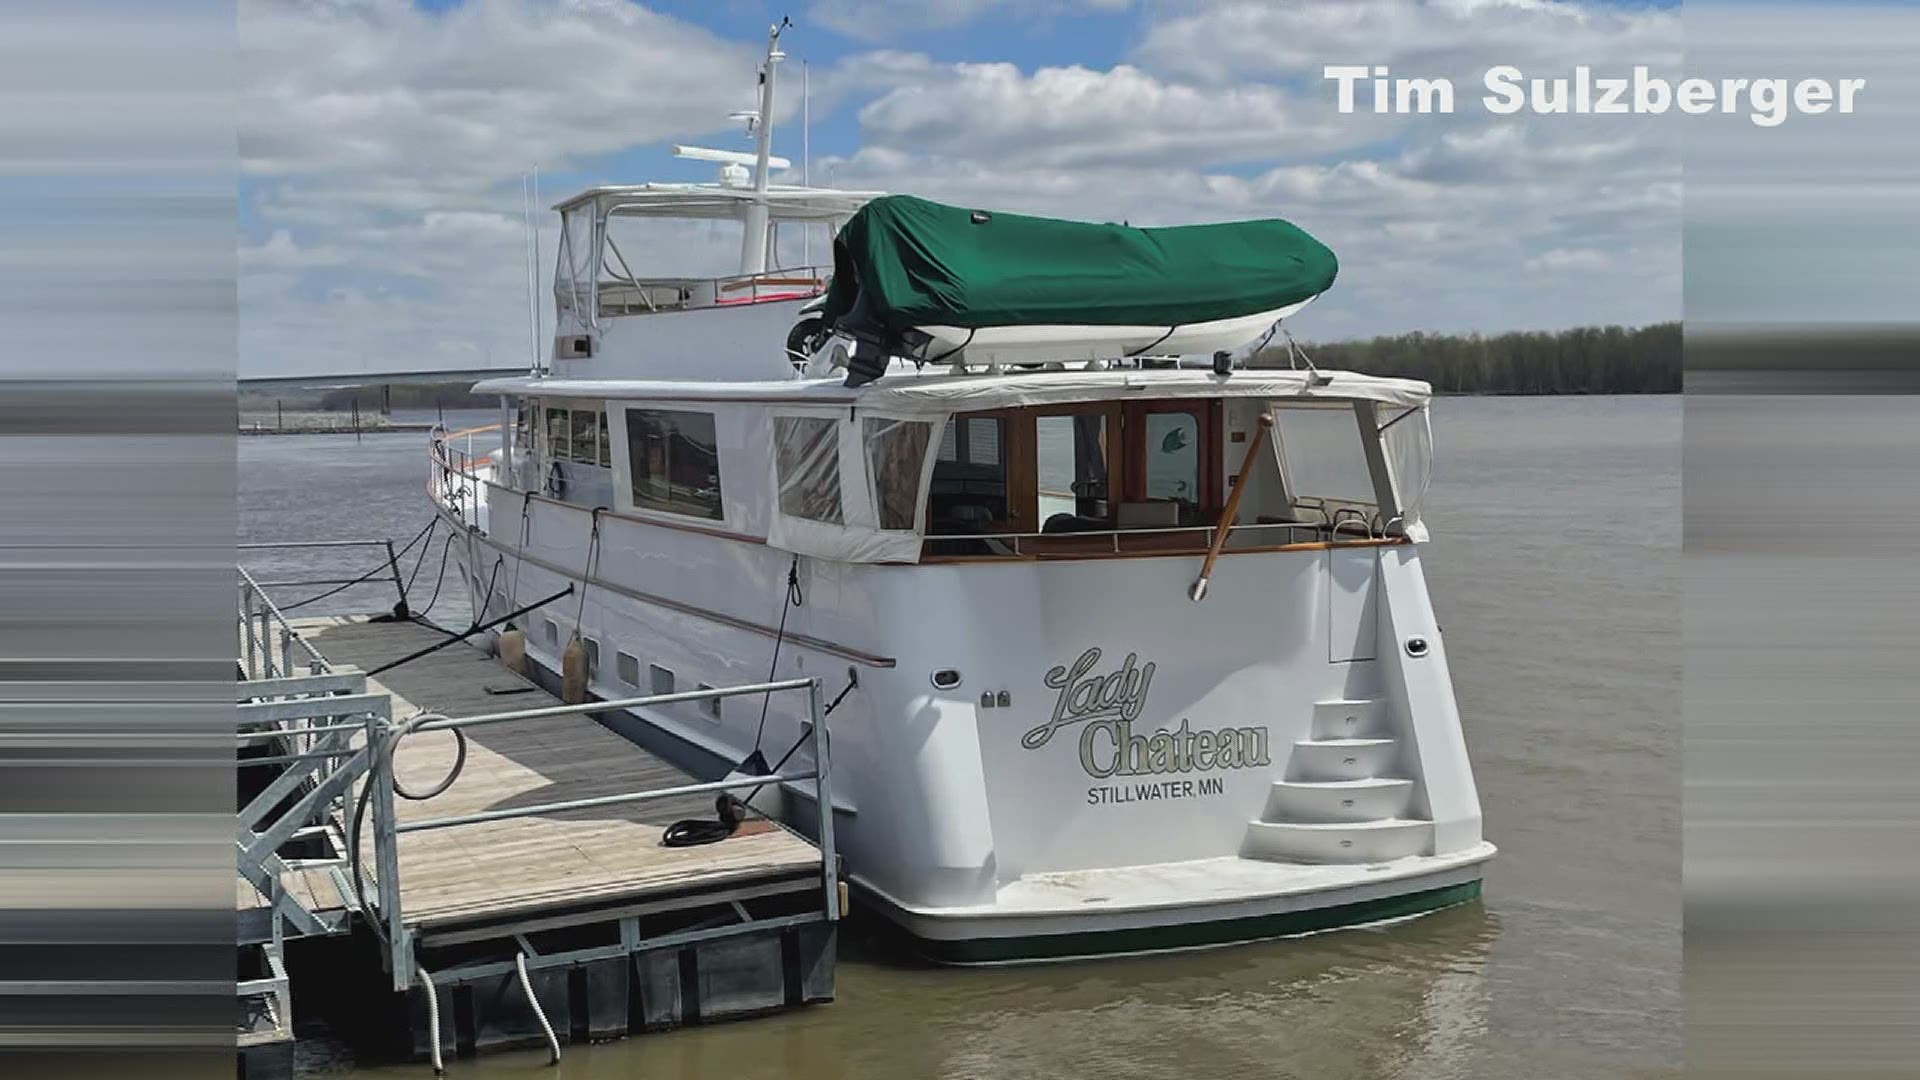 The Muscatine Fire Department and Muscatine County Search and Rescue team assisted an 80-foot yacht Wednesday that was taking on water while traveling upriver.